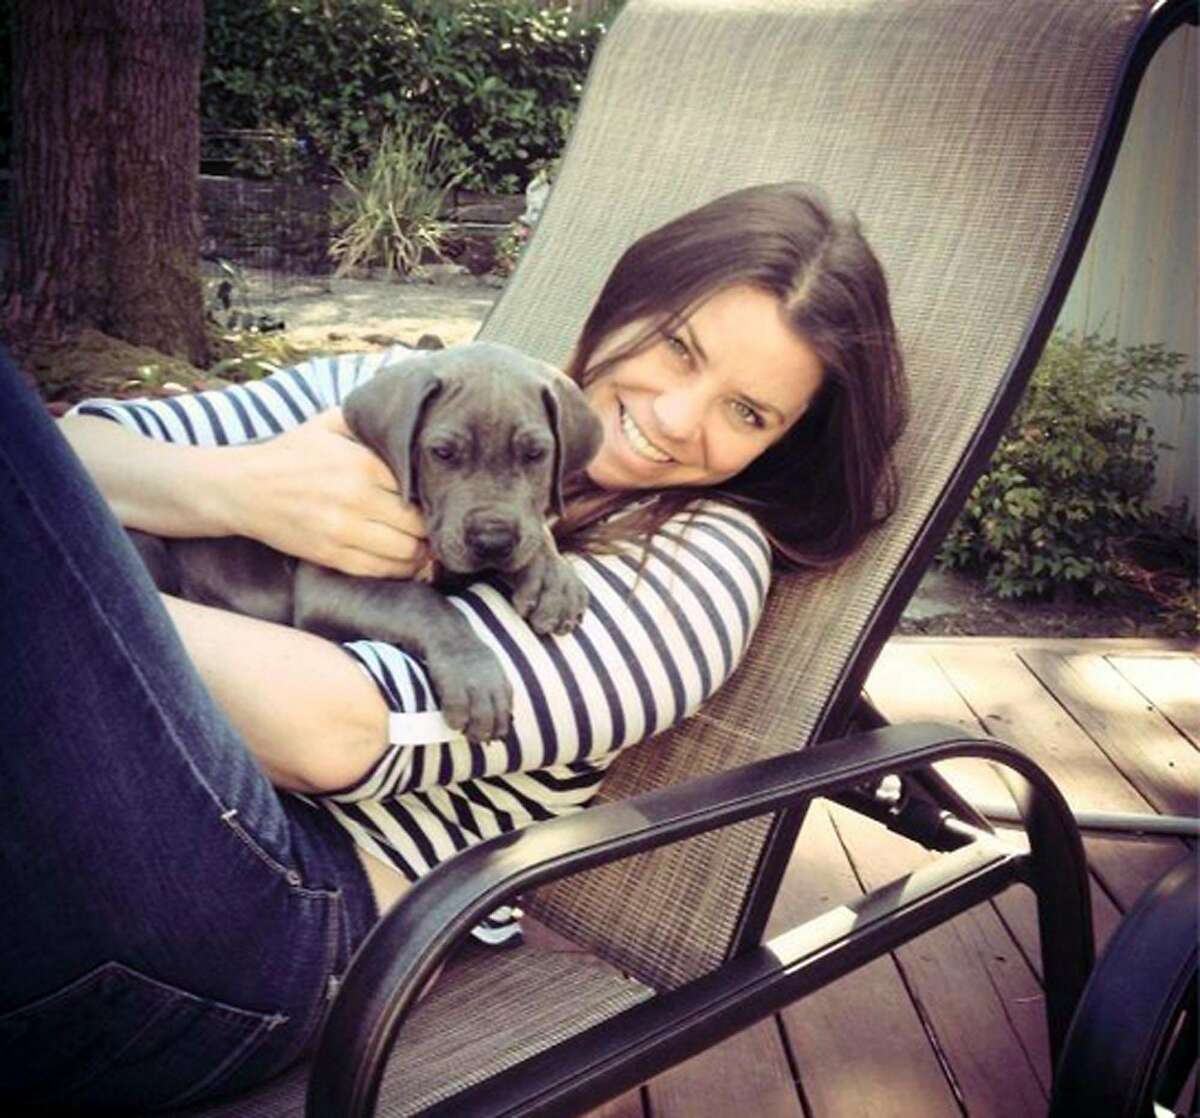 This undated file photo provided by the Maynard family shows Brittany Maynard, a terminally ill woman who decided to end her life early under an Oregon law. She died Nov. 1, 2014. The Catholic Church has called Maynard's decision to die "reprehensible," and said physician-assisted suicide should be condemned. Maynard's mother, Debbie Ziegler, issued a sharp written response Tuesday, Nov. 18, saying the Vatican official's comments came as the family was grieving and were "more than a slap in the face."( (AP Photo/Maynard Family, File)